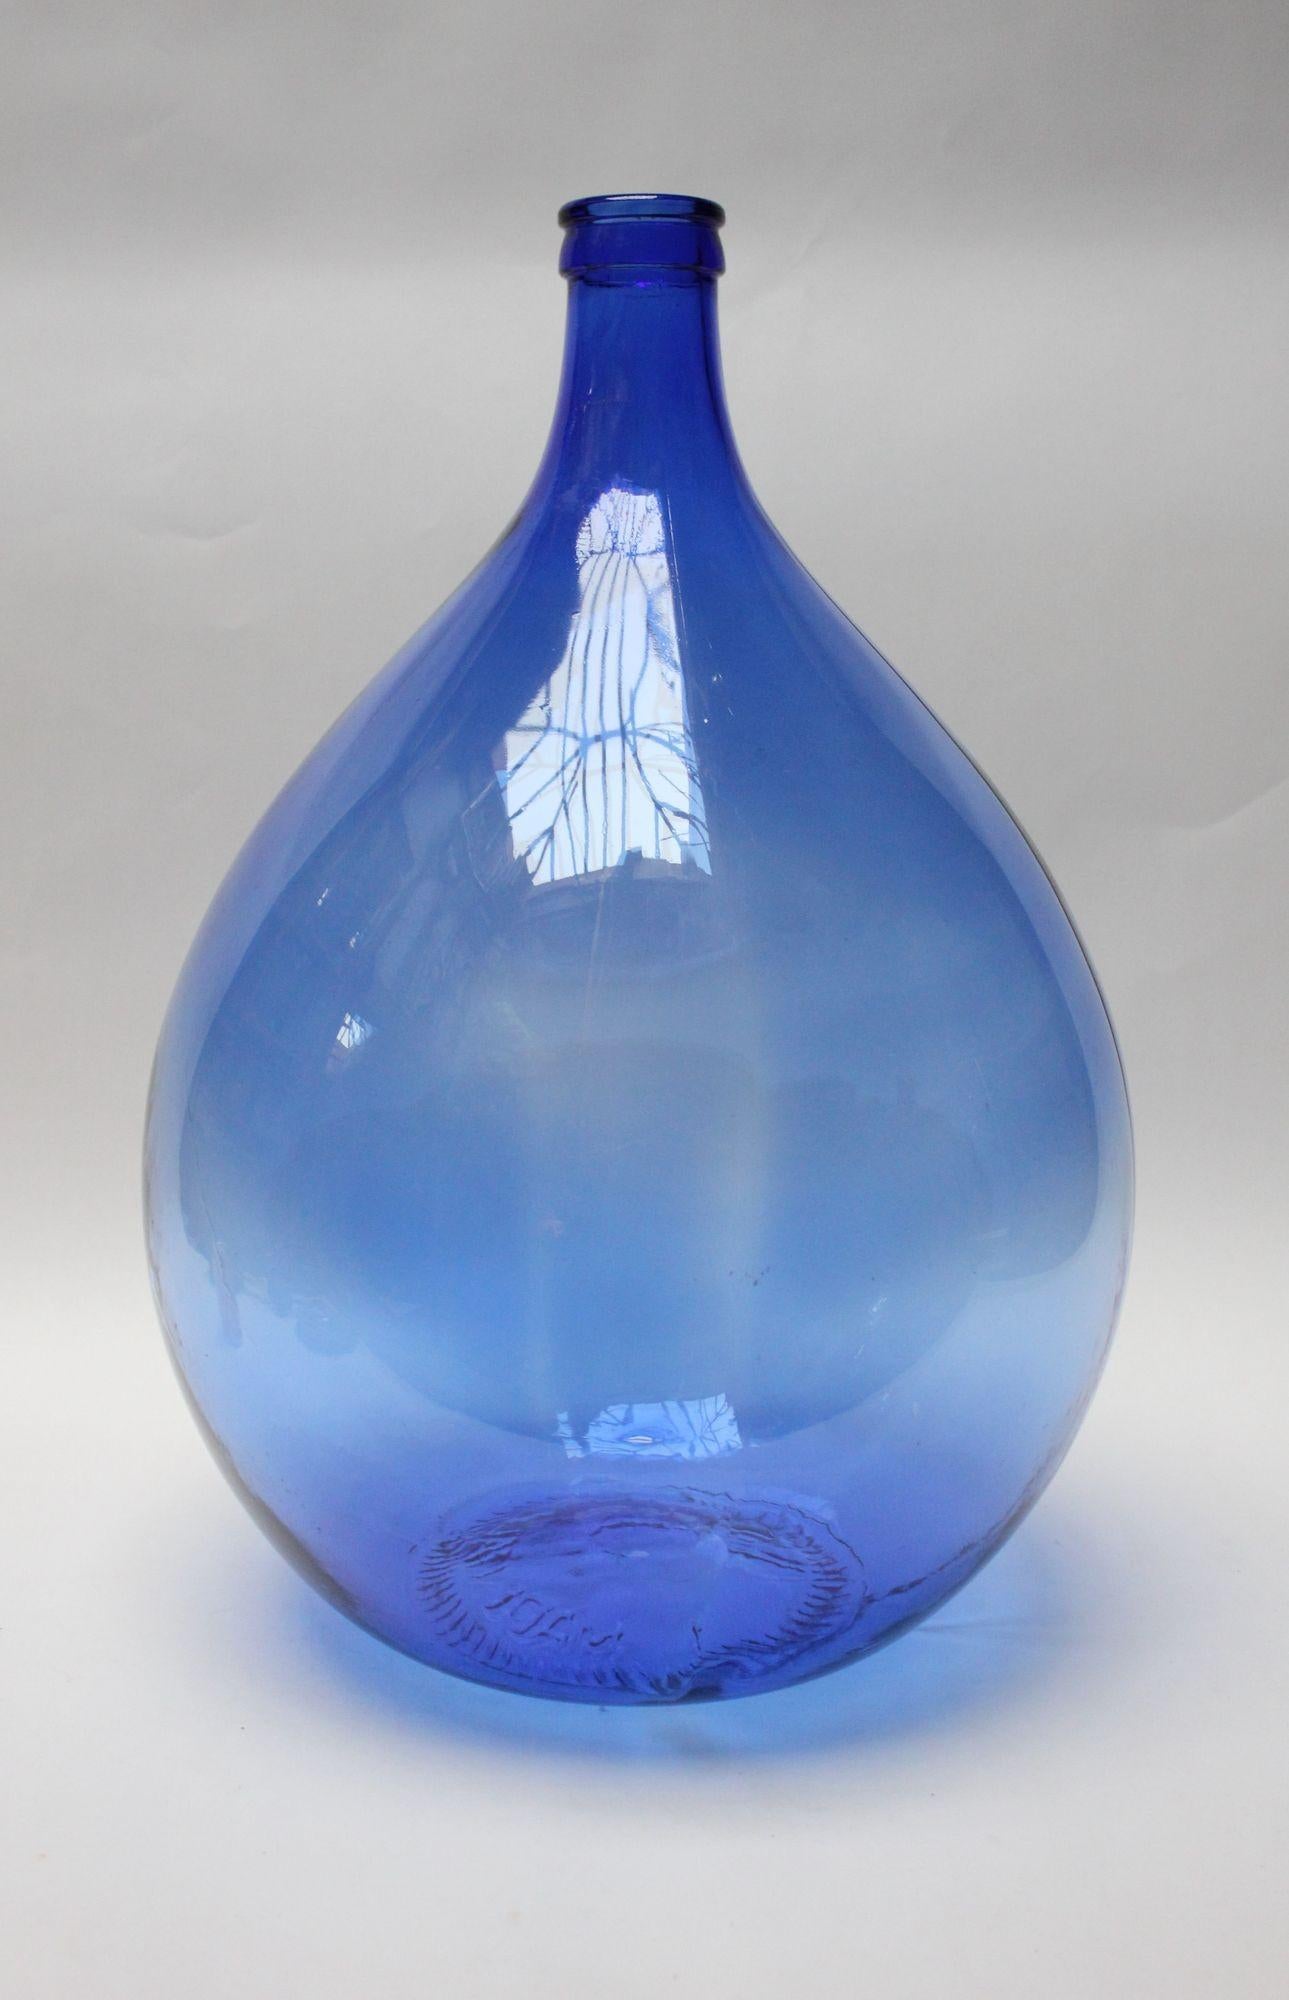 Large 54-liter demijohn / carboy in uncommon cobalt blue glass originally used for transporting wine (ca. mid-20th century, Italy).
There is a cluster of small scratches to the neck, as shown, along with light, general wear consistent with